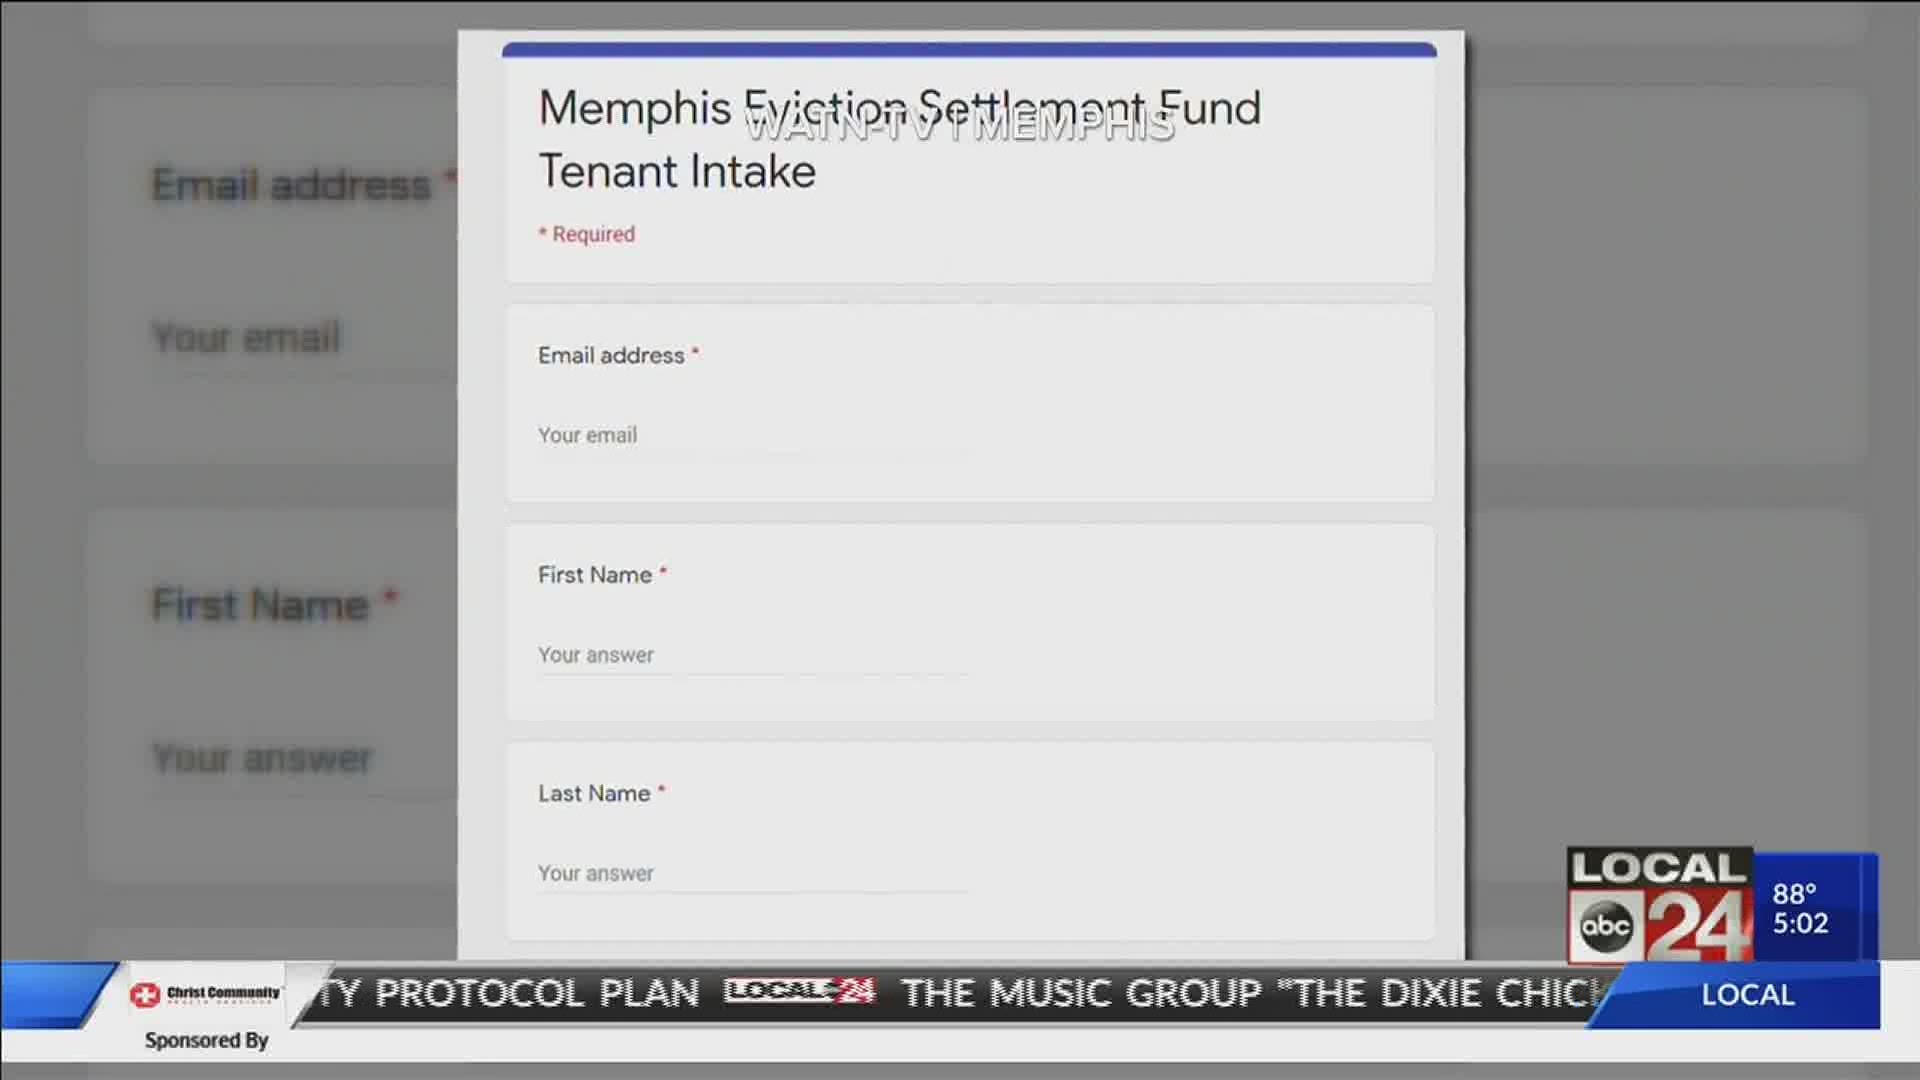 A $2 million eviction settlement fund was created to settle tenant debts for residents facing COVID-19 related evictions.